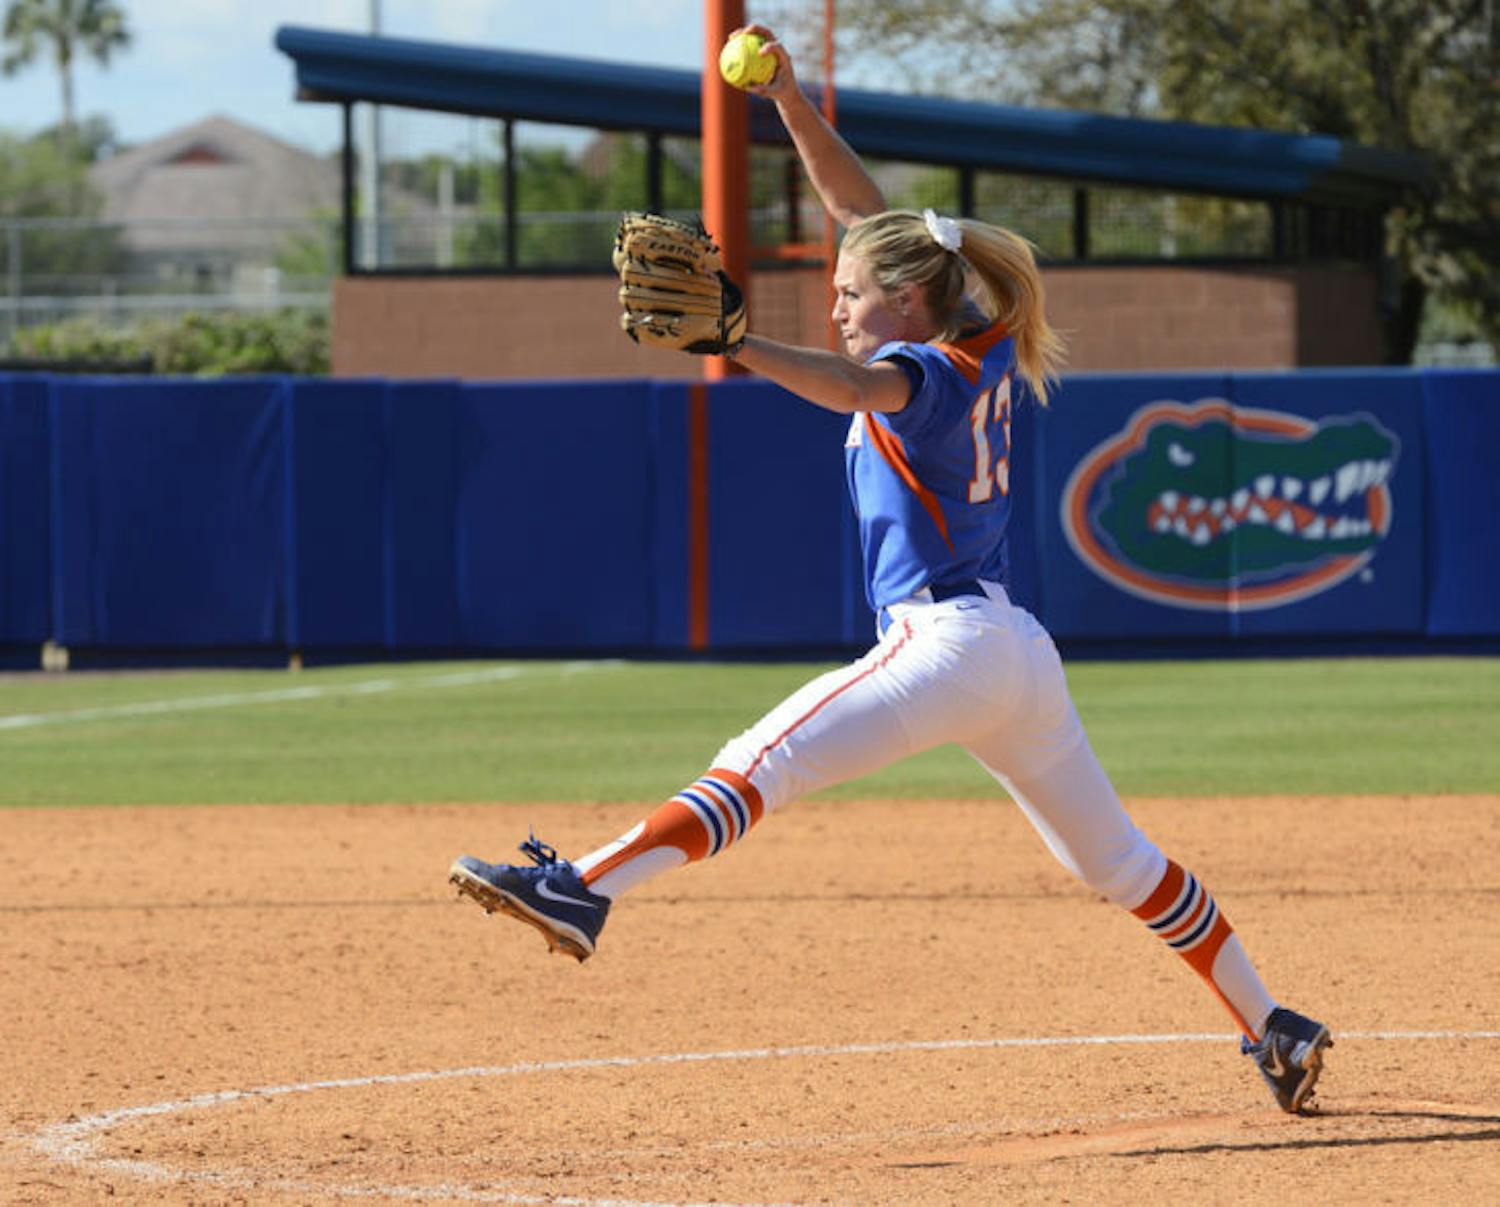 Hannah Rogers pitches during Florida’s 4-2 win against Mississippi State on April 6, 2013. Rogers led the Gators in wins and strikeouts in the 2013 season, in which UF went to the Women’s College World Series.